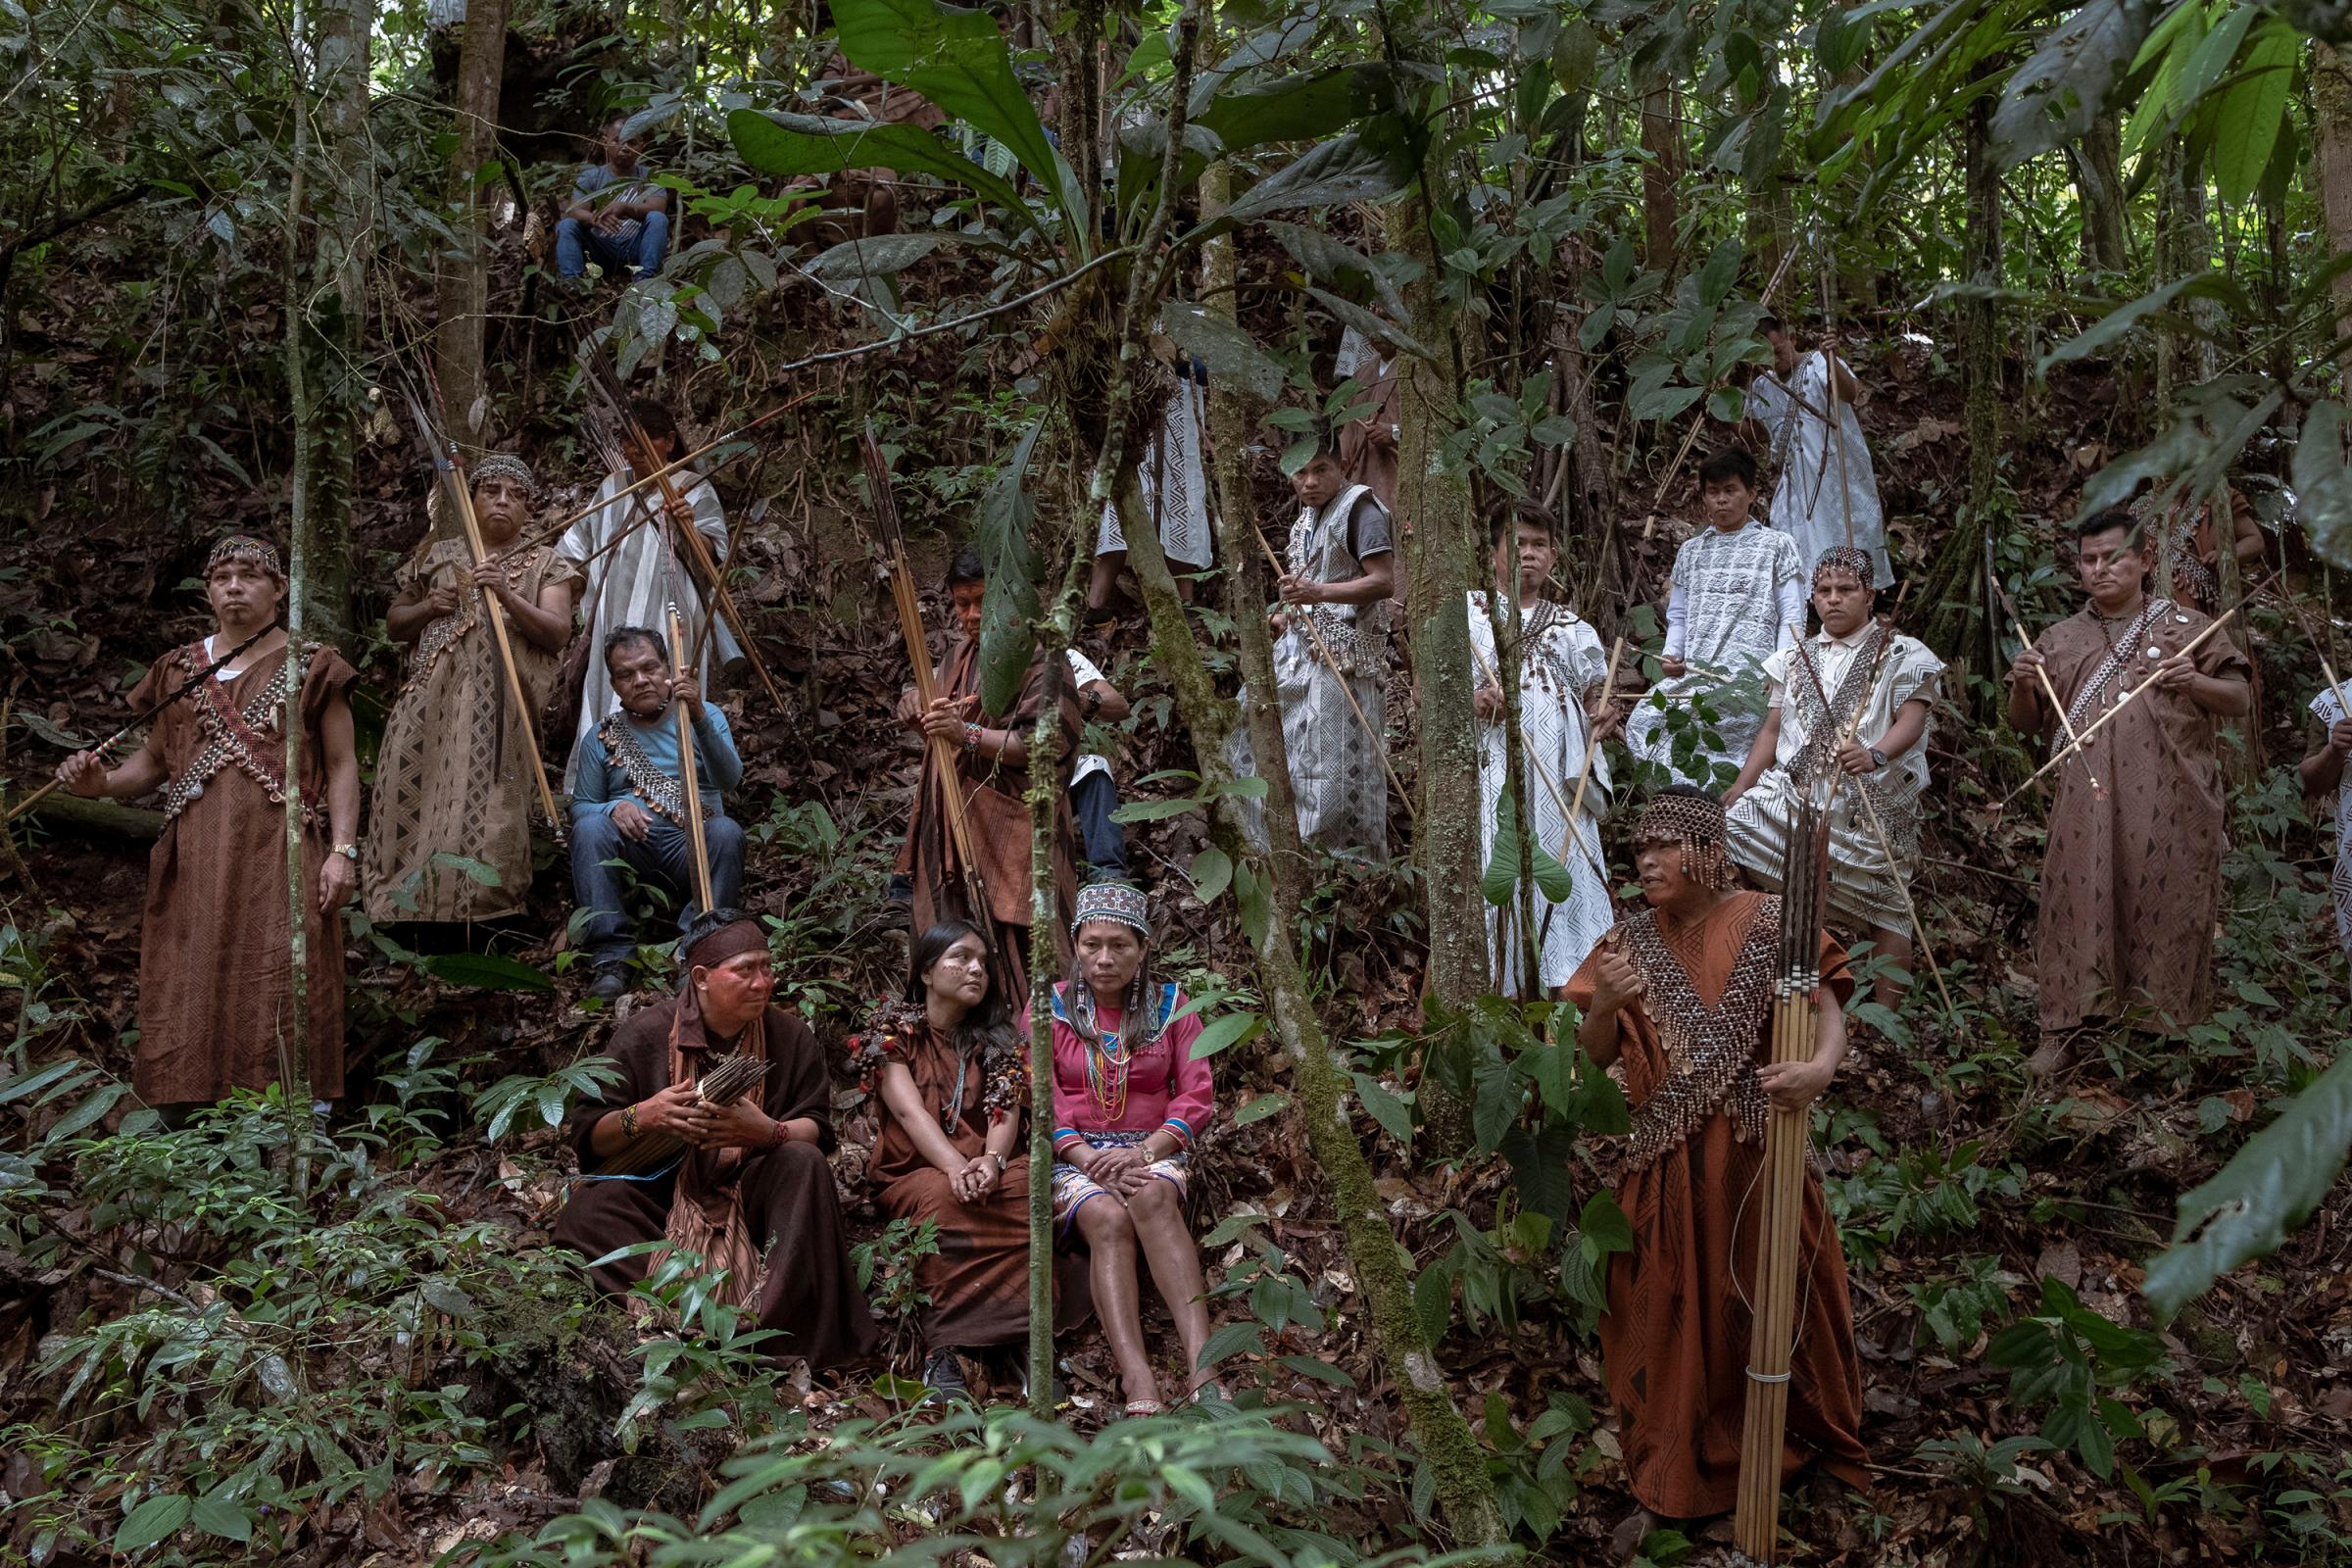 Kakataibo, voices from the forest - Herlin odicio, Kakataibo leader gives a speech during the...